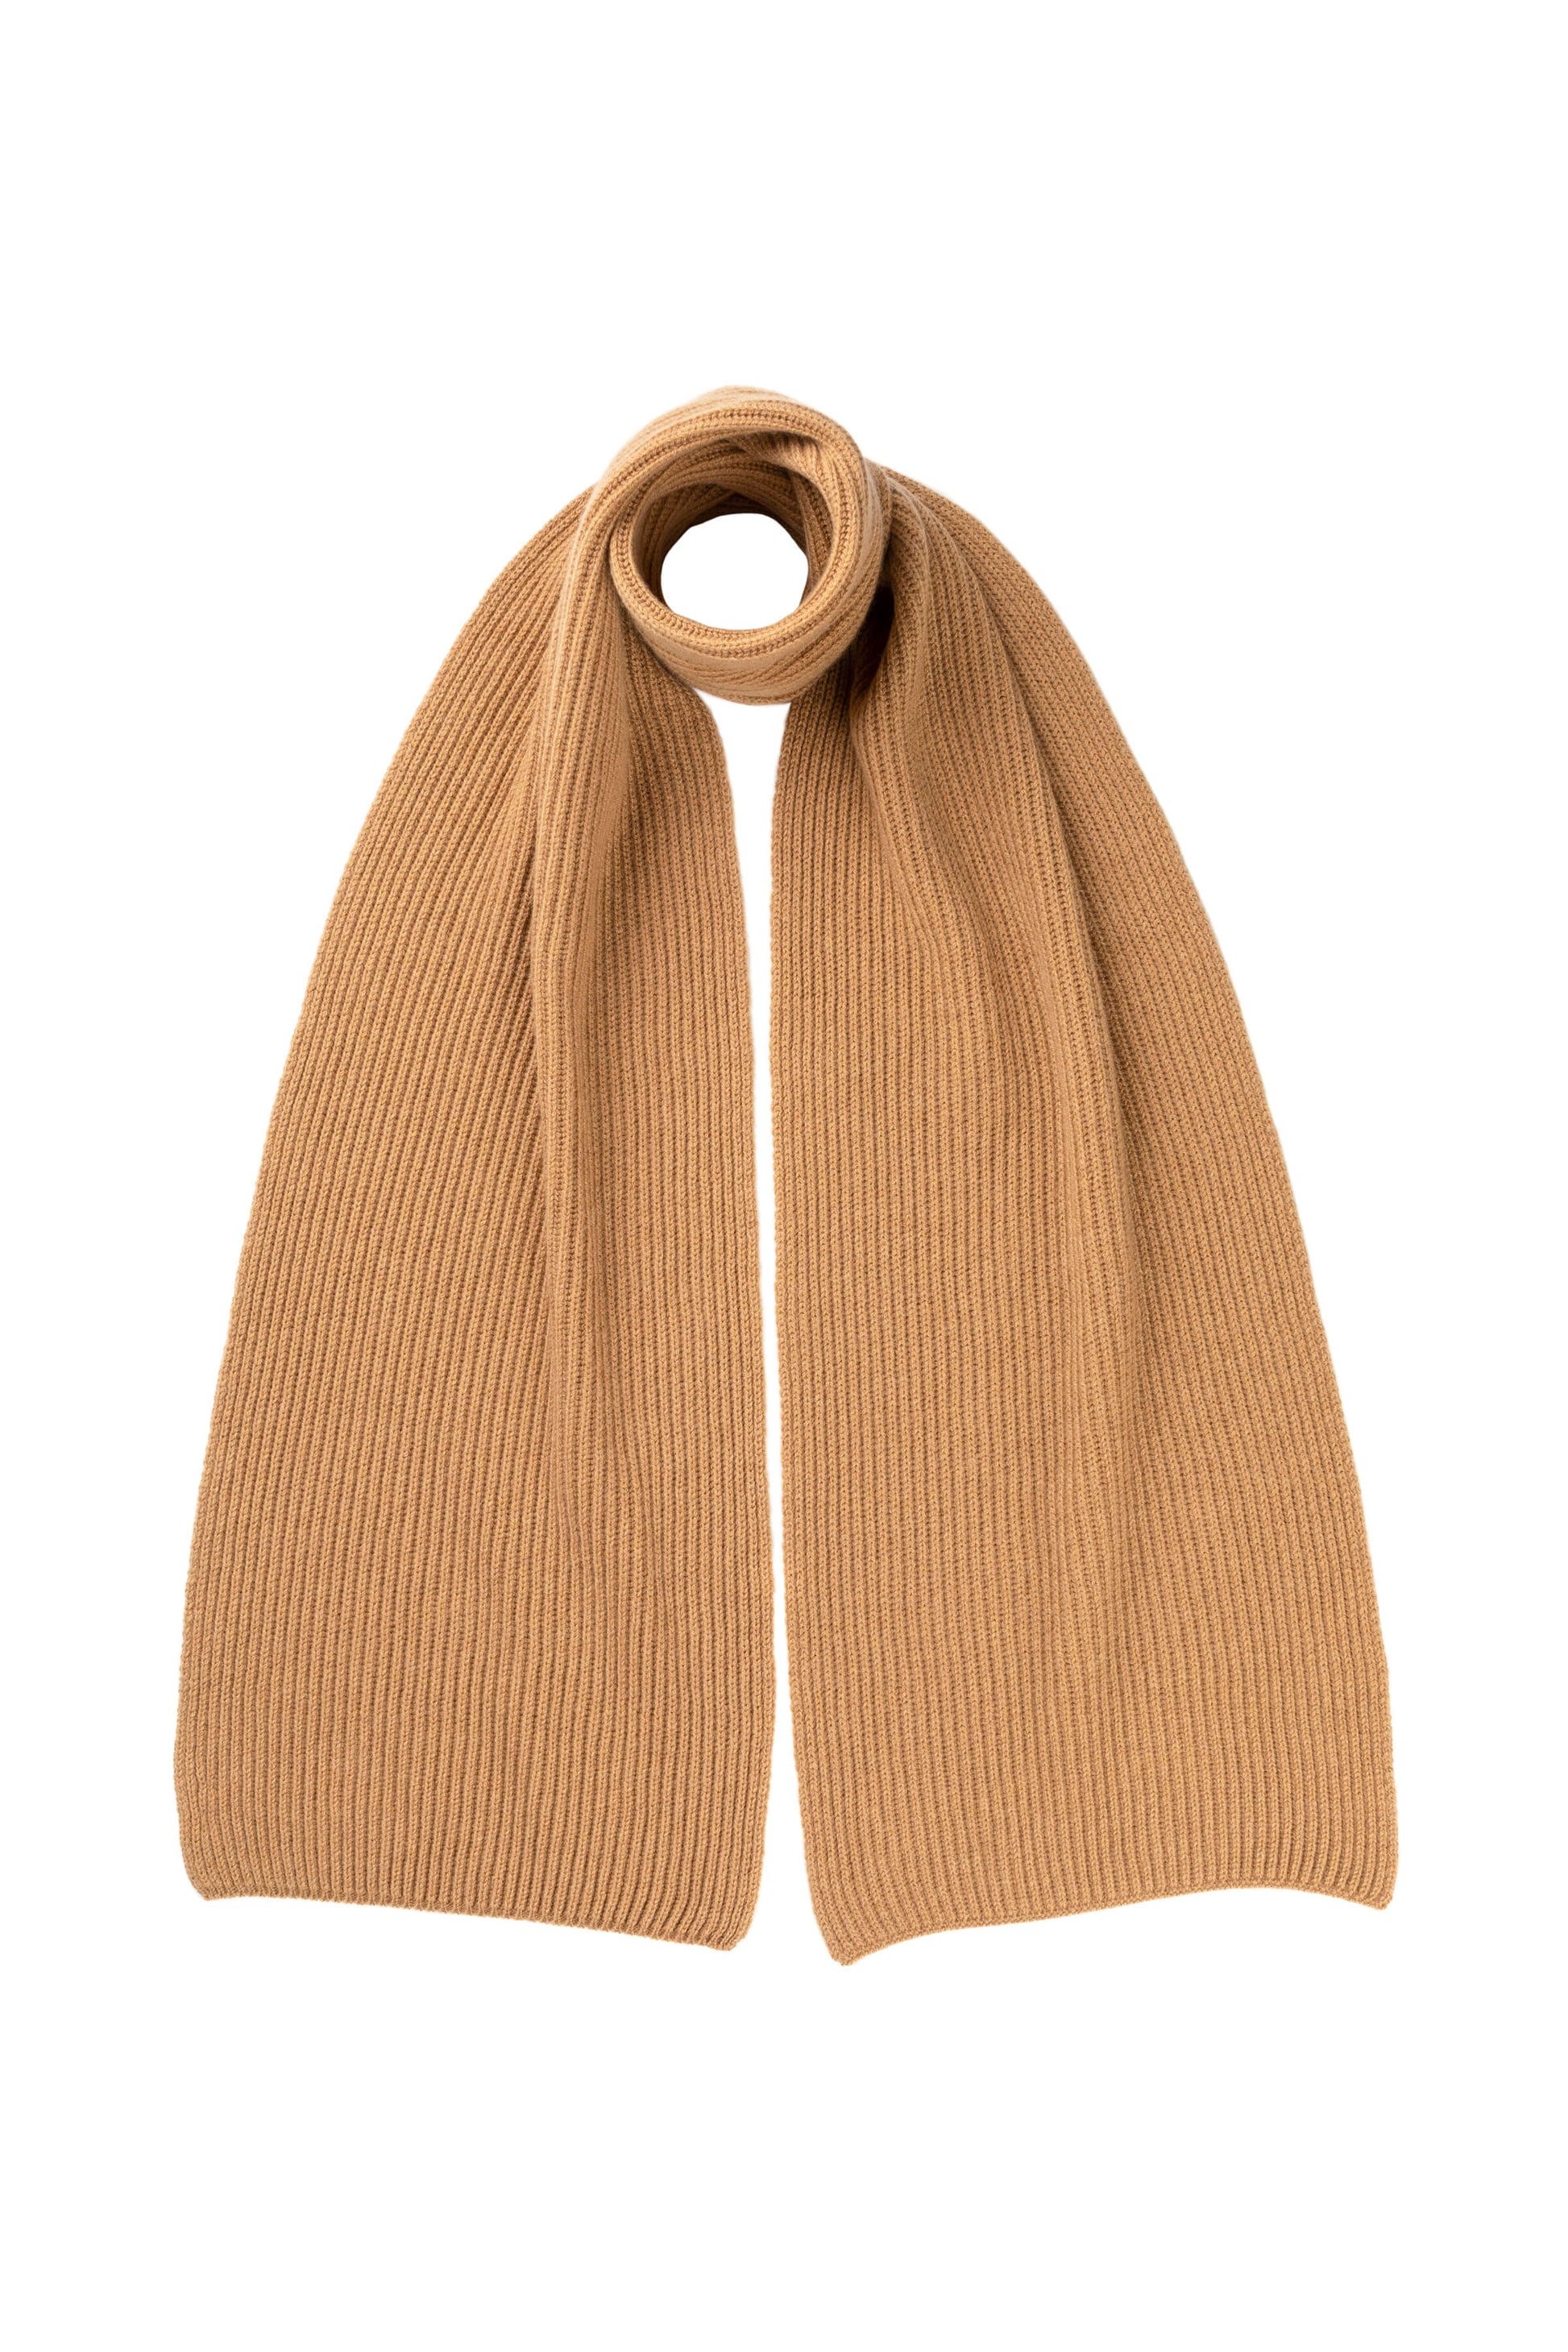 Johnstons of Elgin Knitted Accessories Camel Cashmere Ribbed Scarf HAA01684HB4315ONE